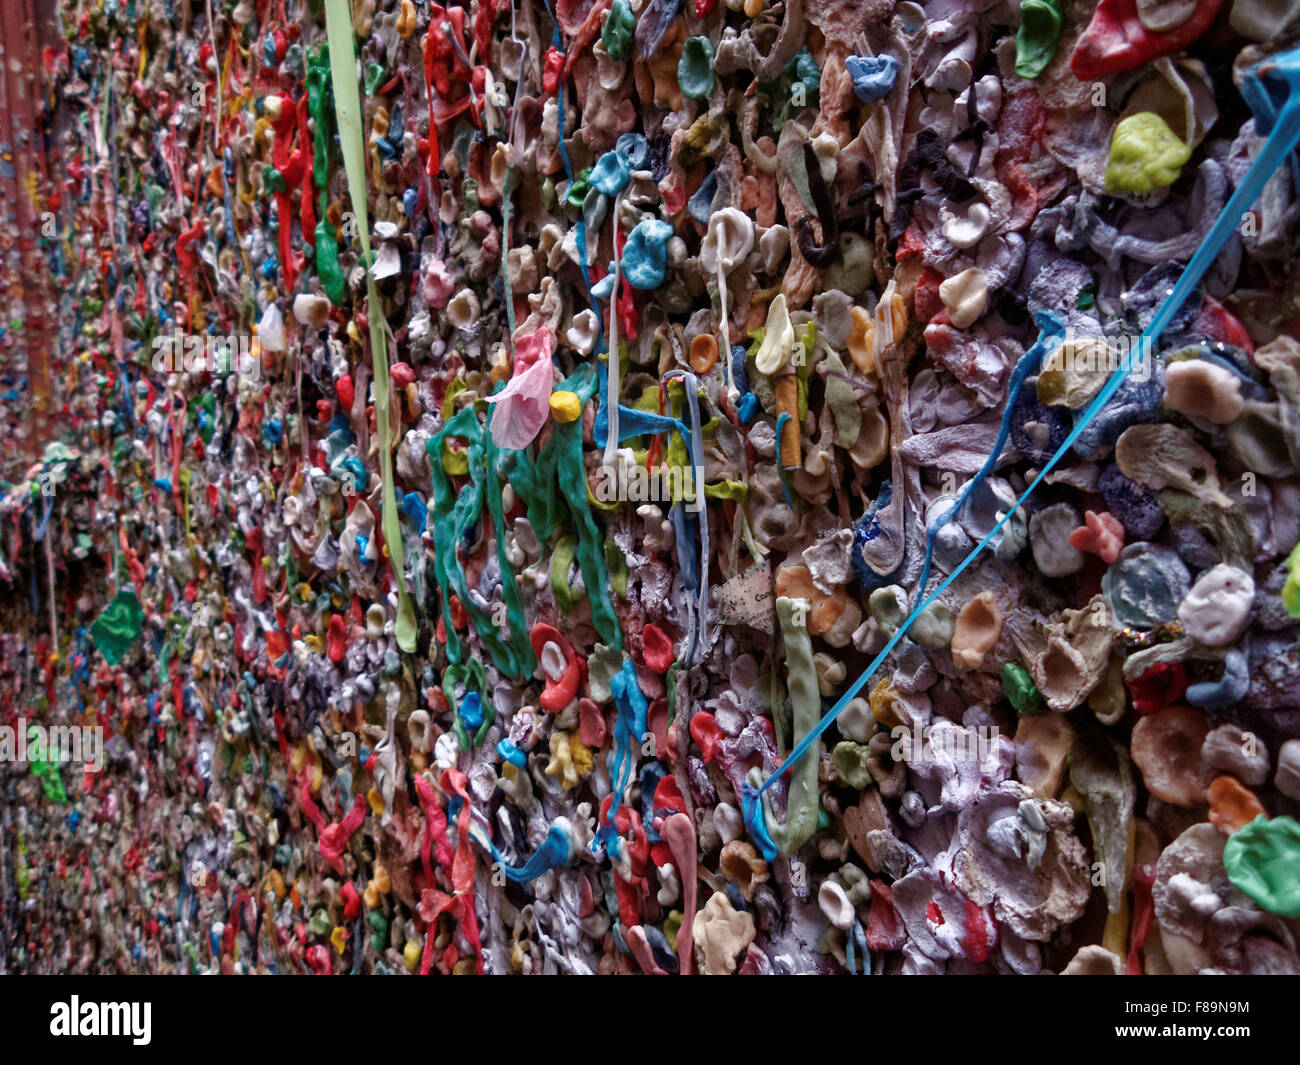 The Pike Place Market Theater Gum Wall in Seattle, Washington is covered in used chewing gum. Stock Photo